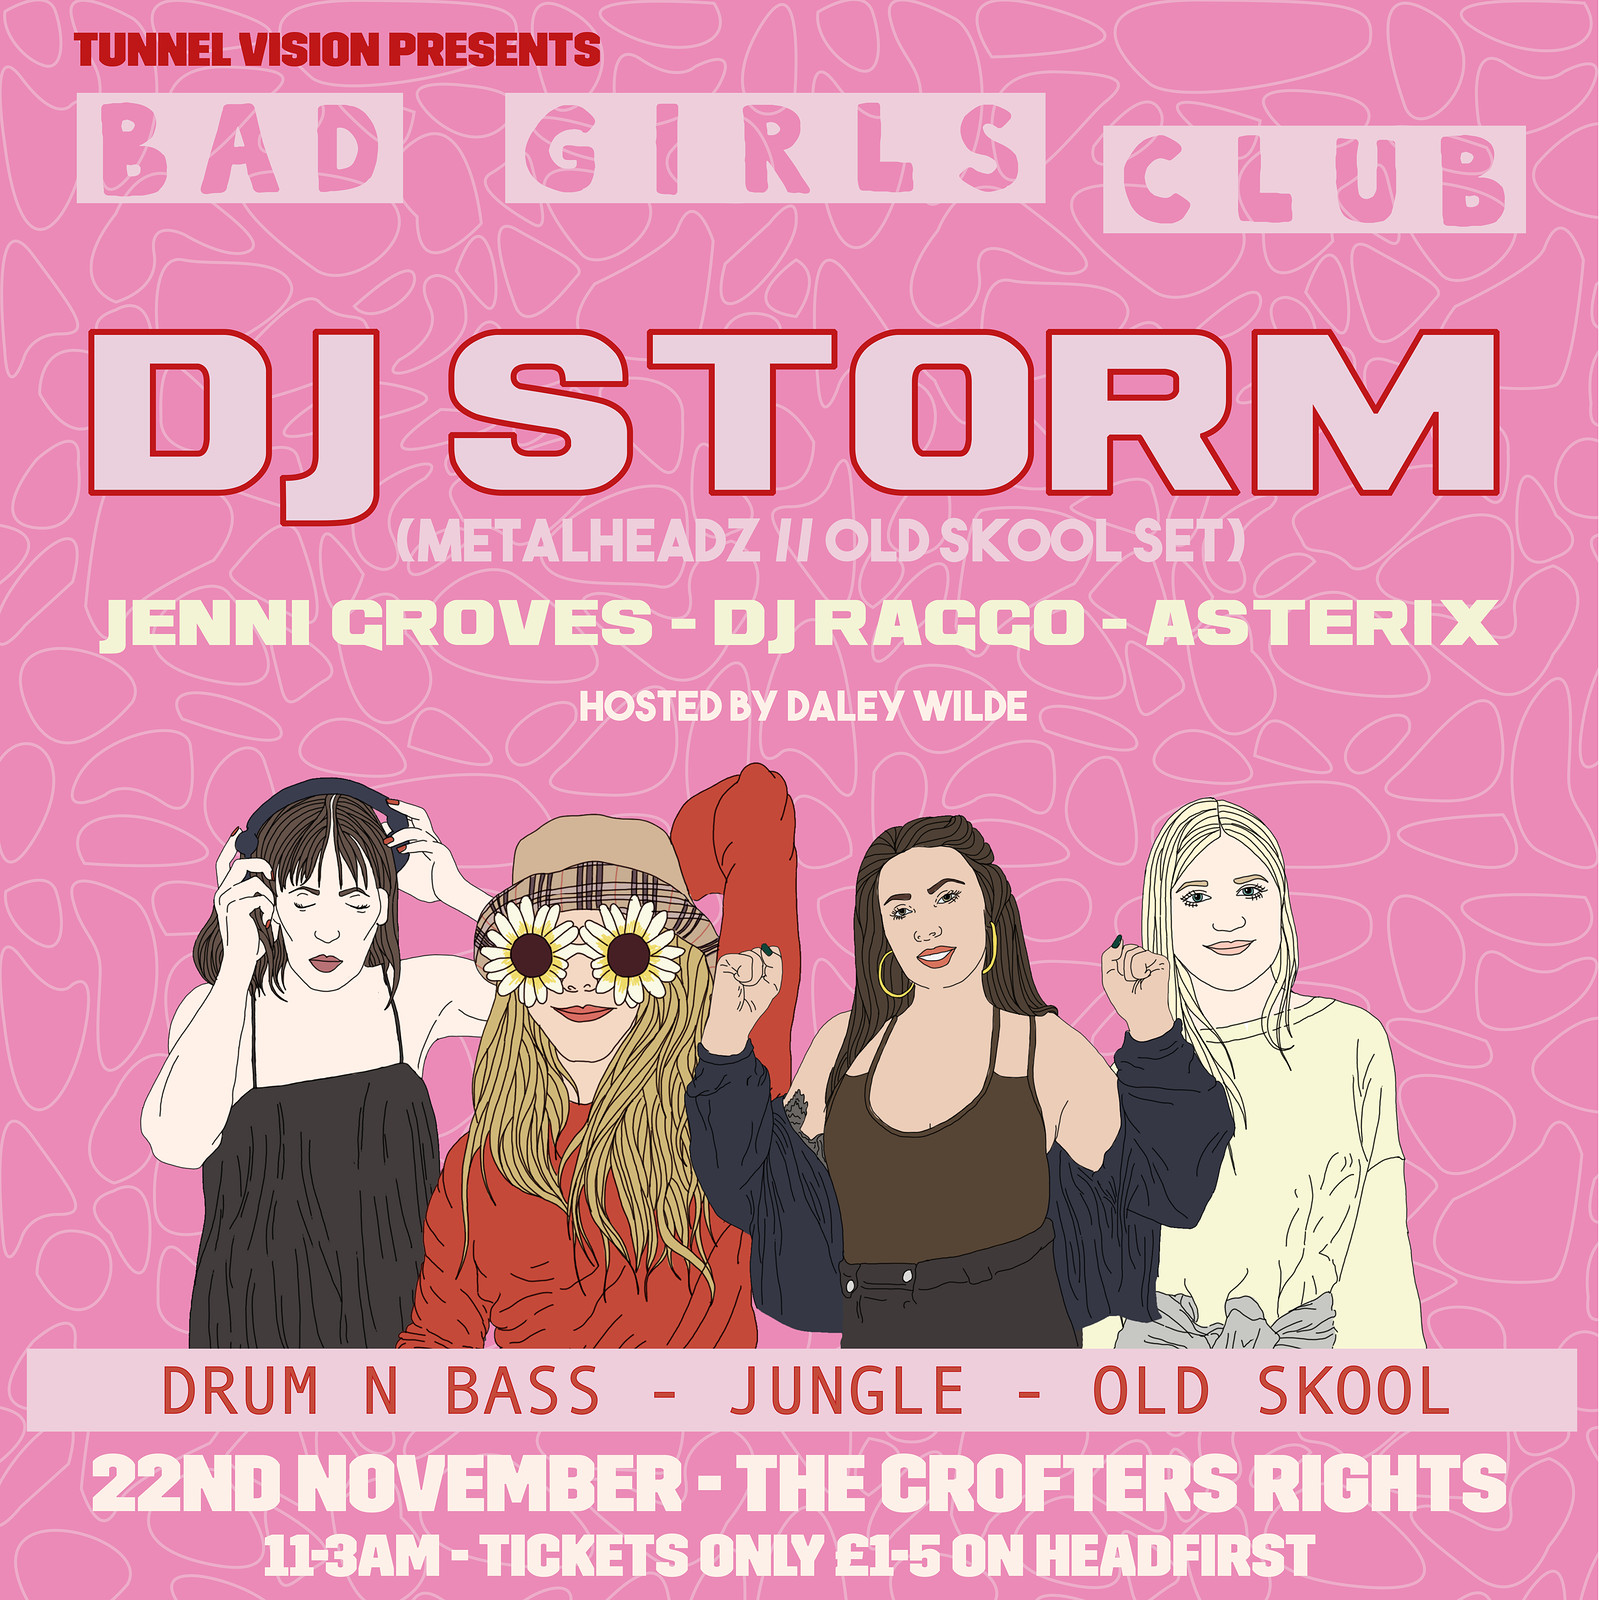 Tunnel Vision: Bad Girls Club w/ DJ Storm at Crofters Rights